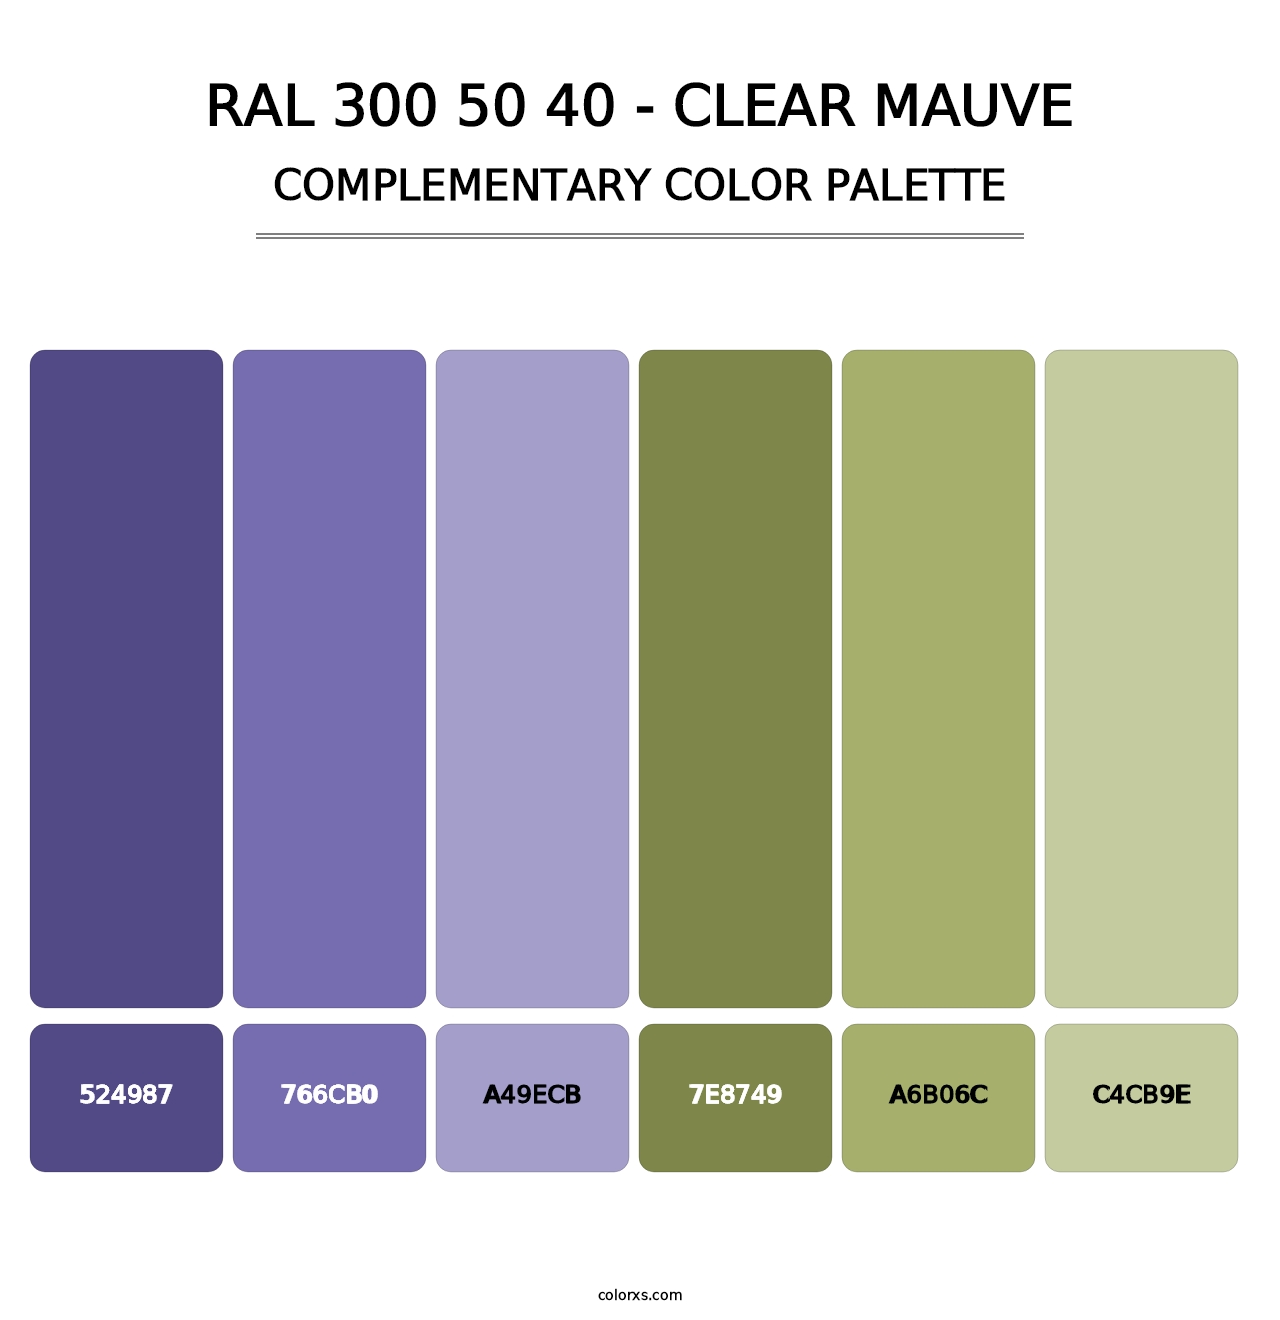 RAL 300 50 40 - Clear Mauve - Complementary Color Palette